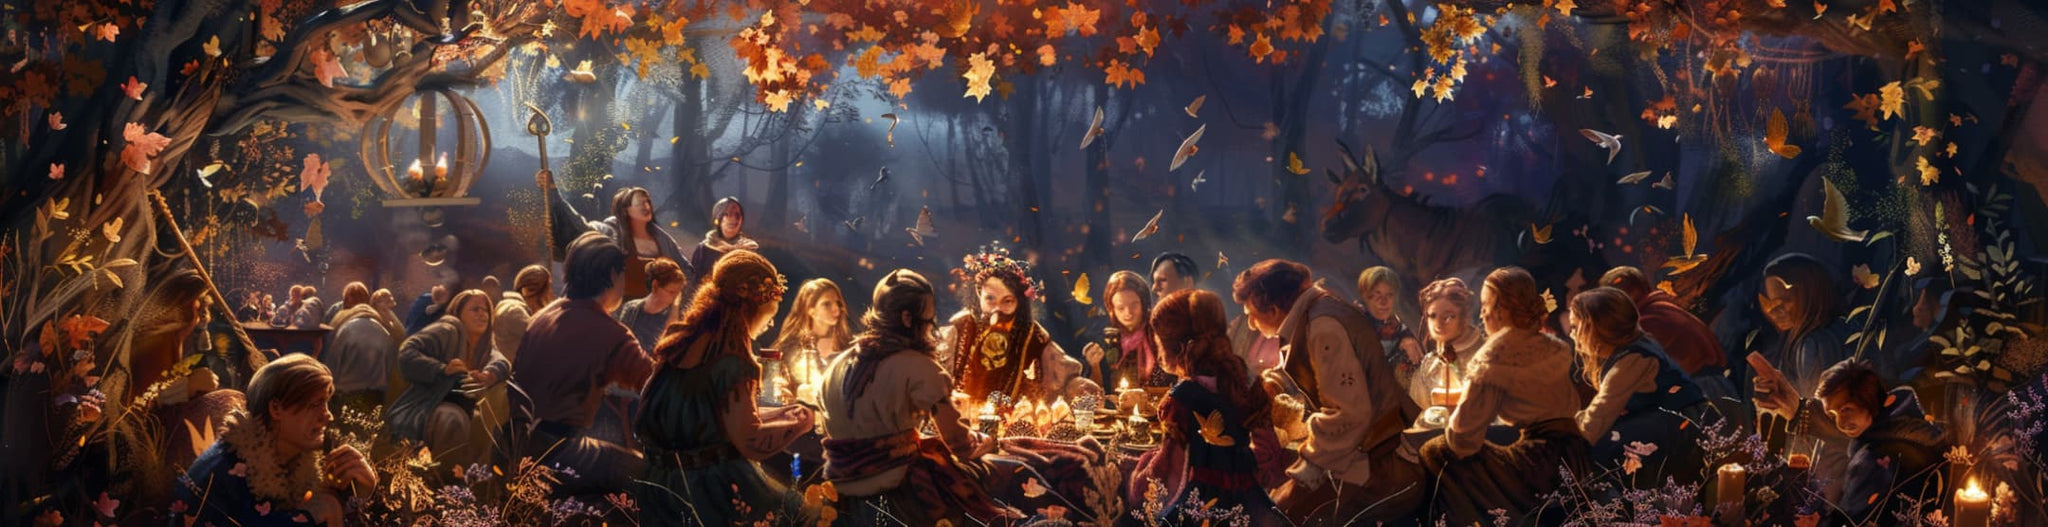 Celebrate the abundance of Mabon by sharing it with others